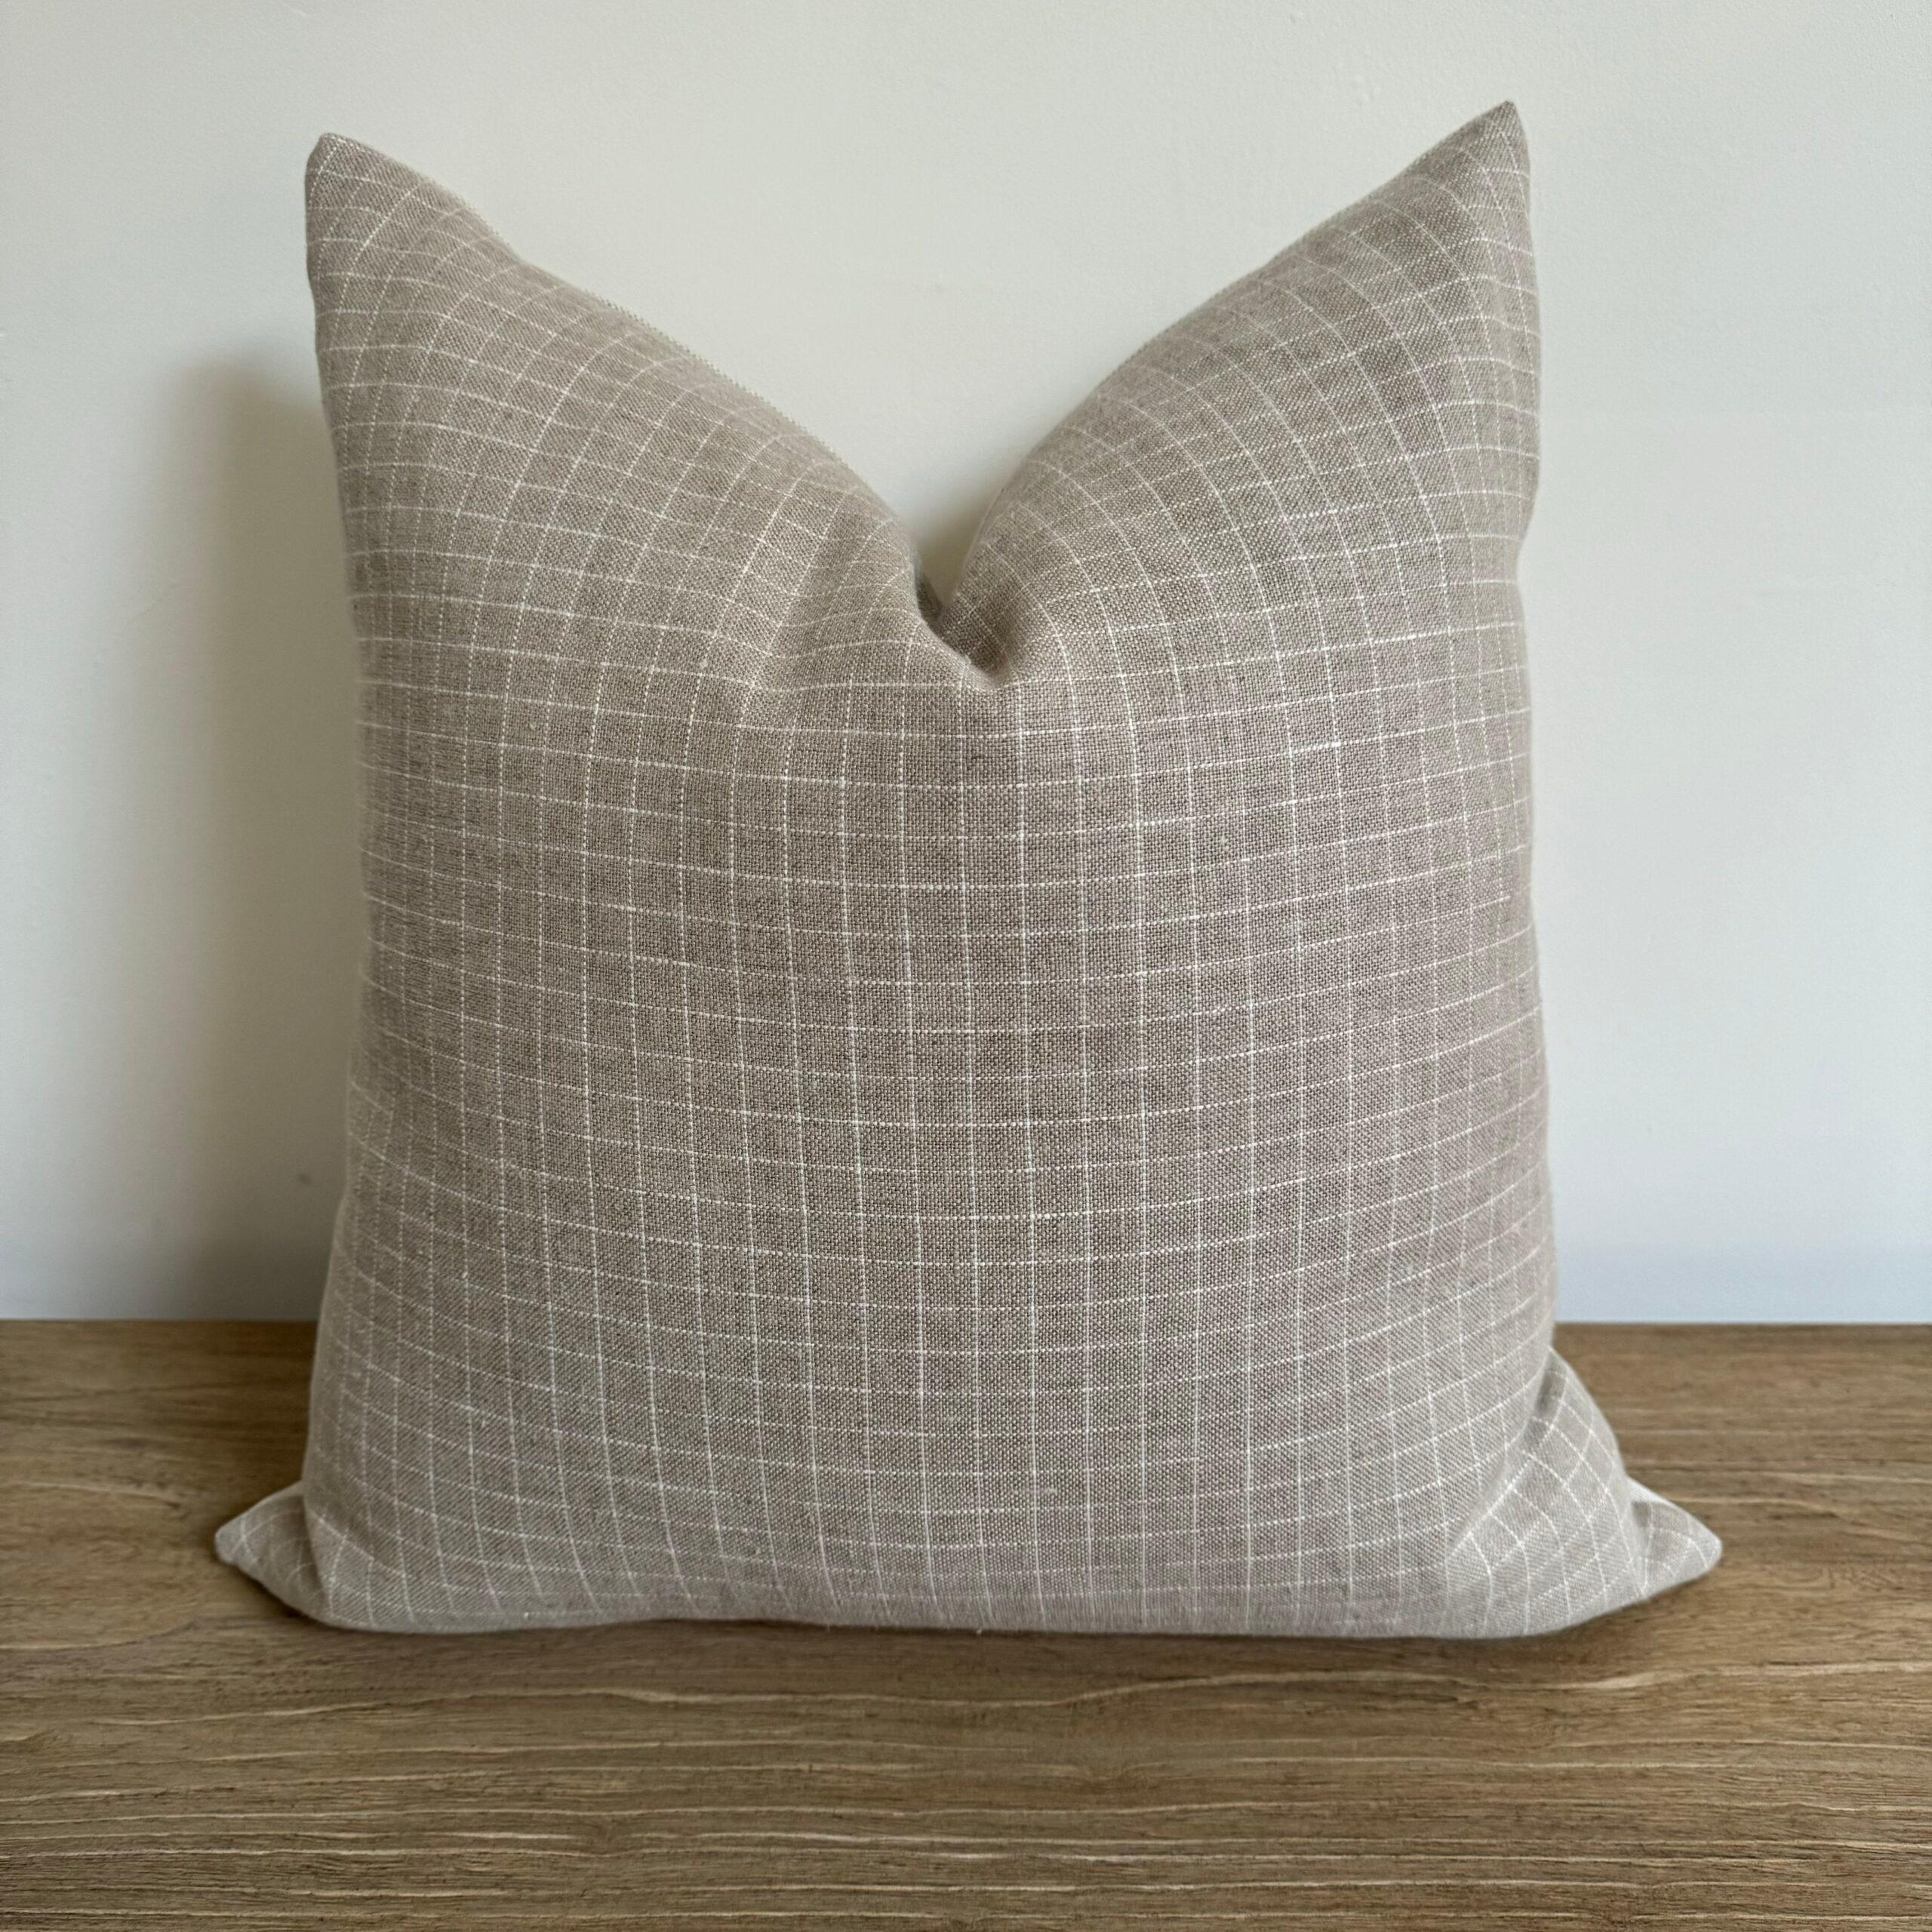 A luxurious heavy woven linen plaid face with stone washed linen back.
Linen fabric is imported from France.
Custom made to order, can be customized to your size.
Color: Blanc / Oyster / Natural
Antique brass zipper
Size 20x20
Includes Down Feather